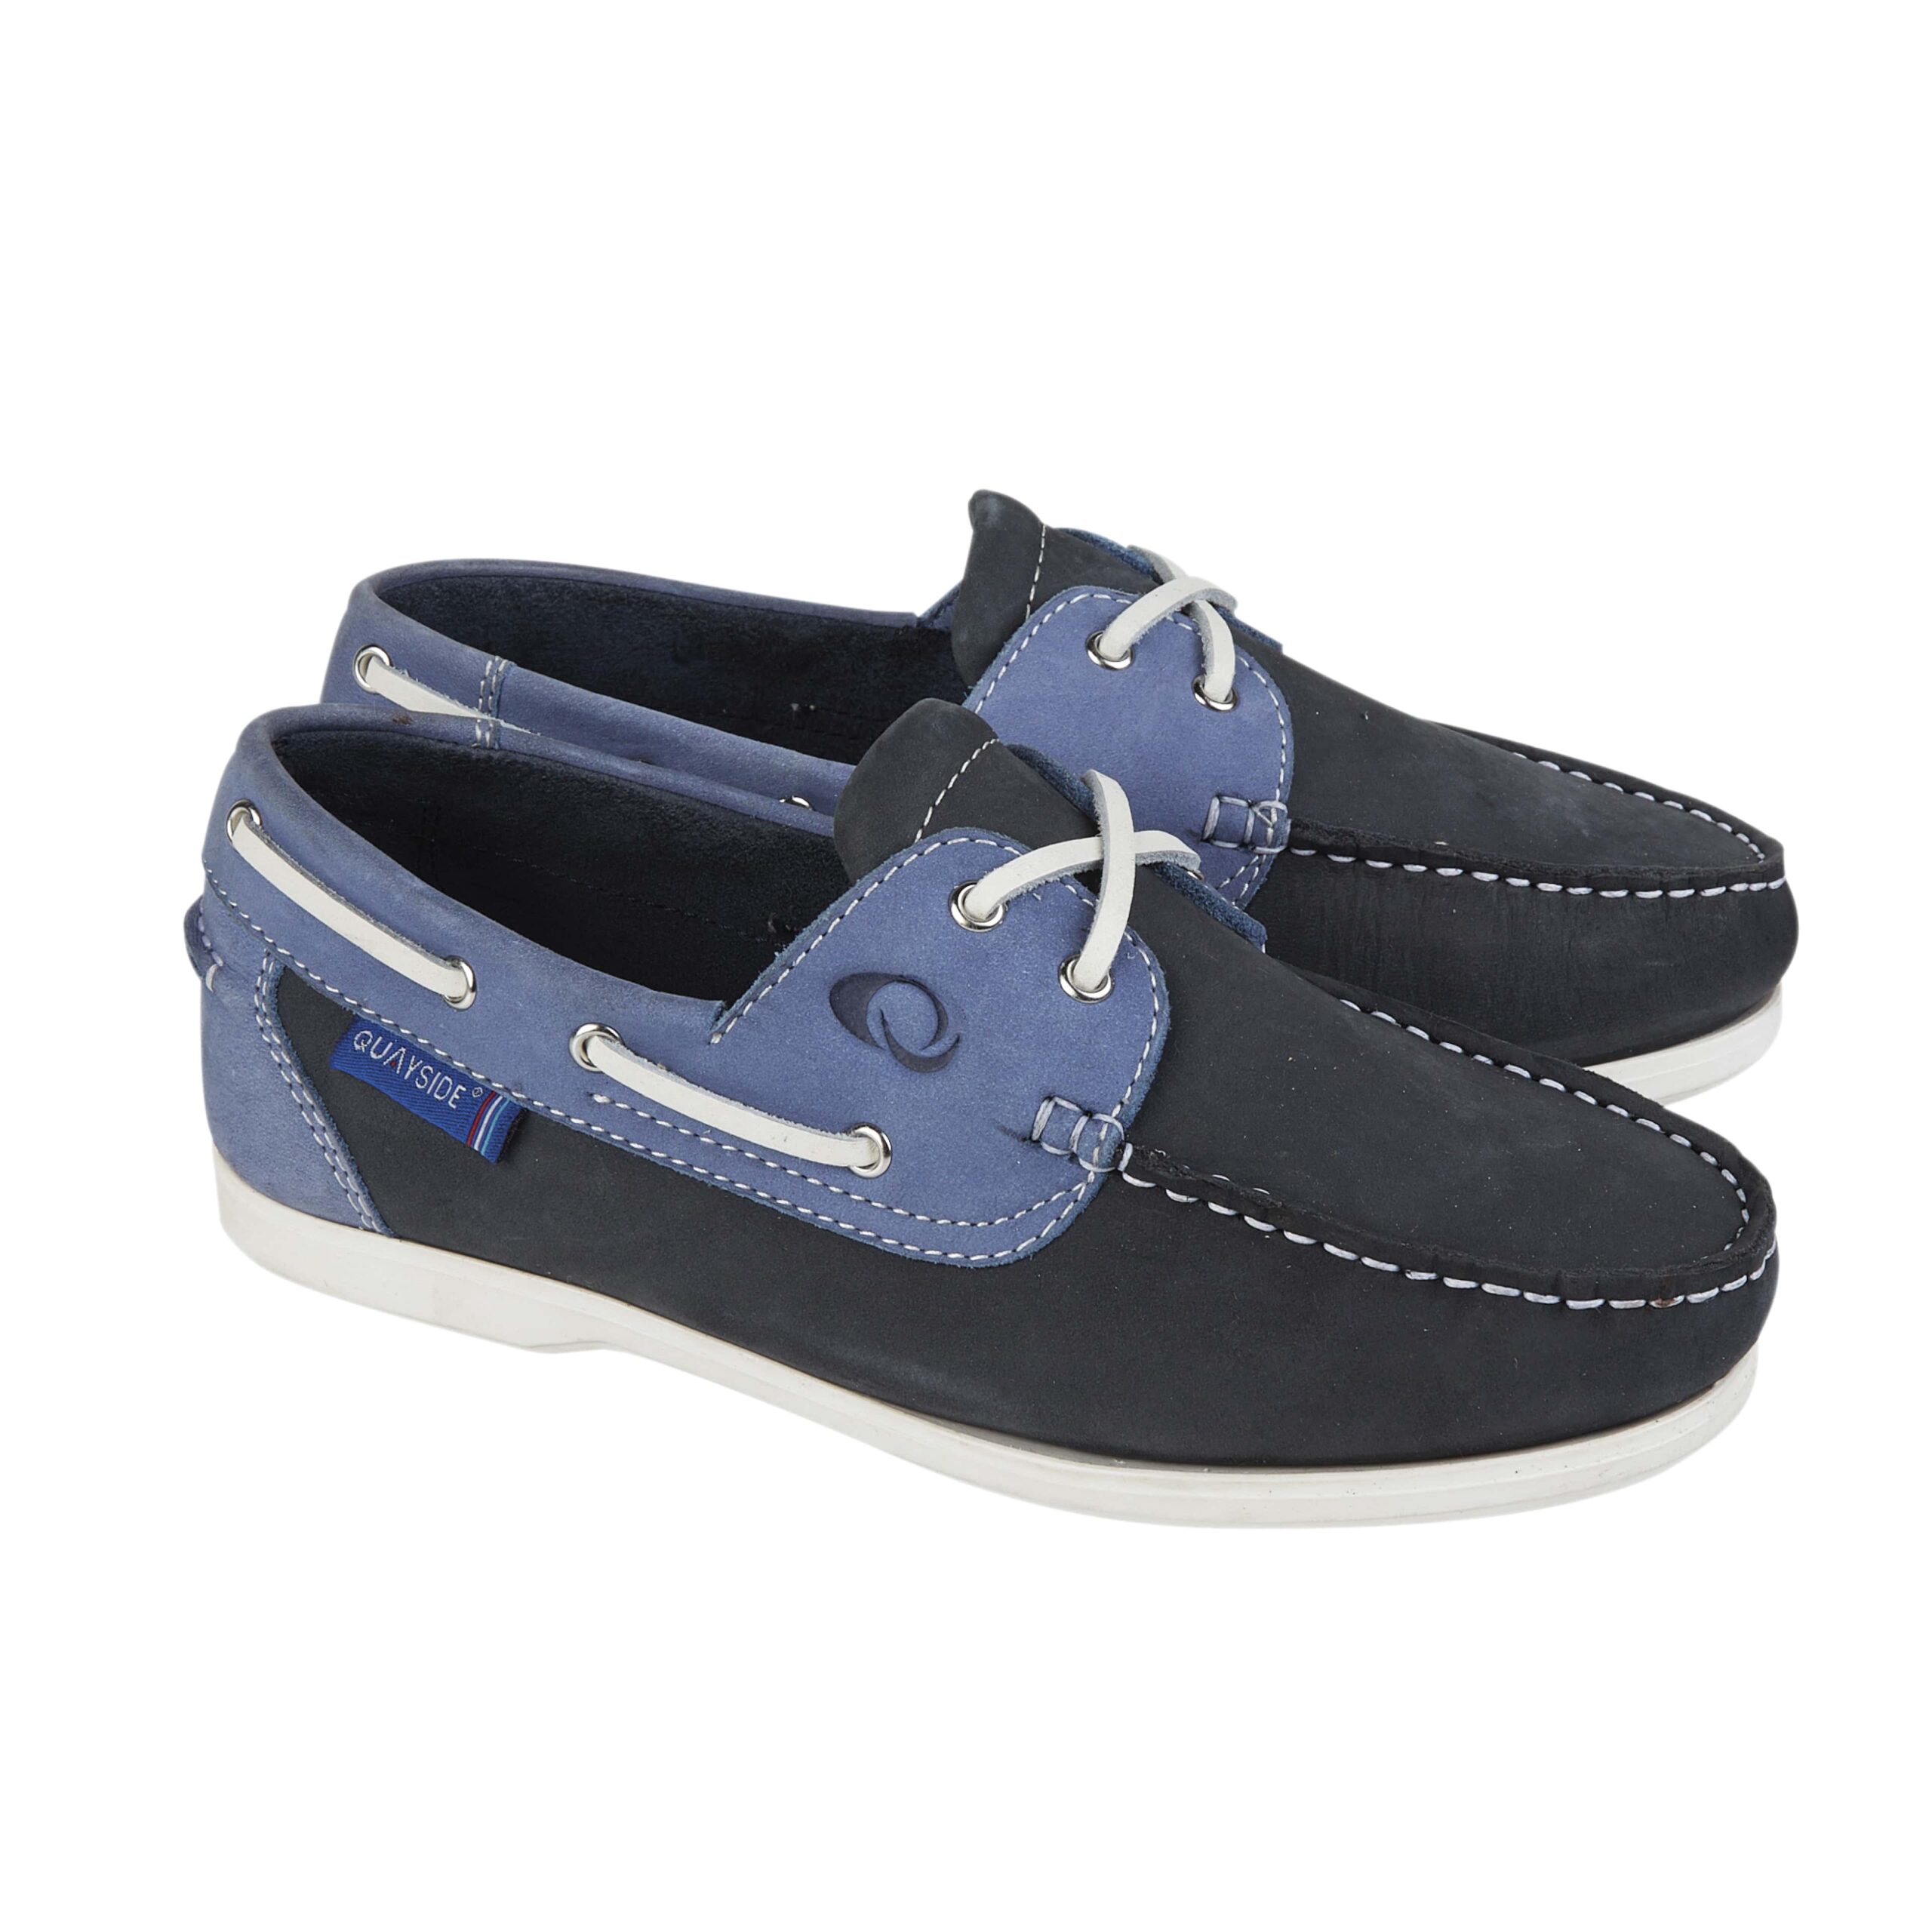 Quayside Washable Bermuda Boat Shoes – Quayside Deck Shoes